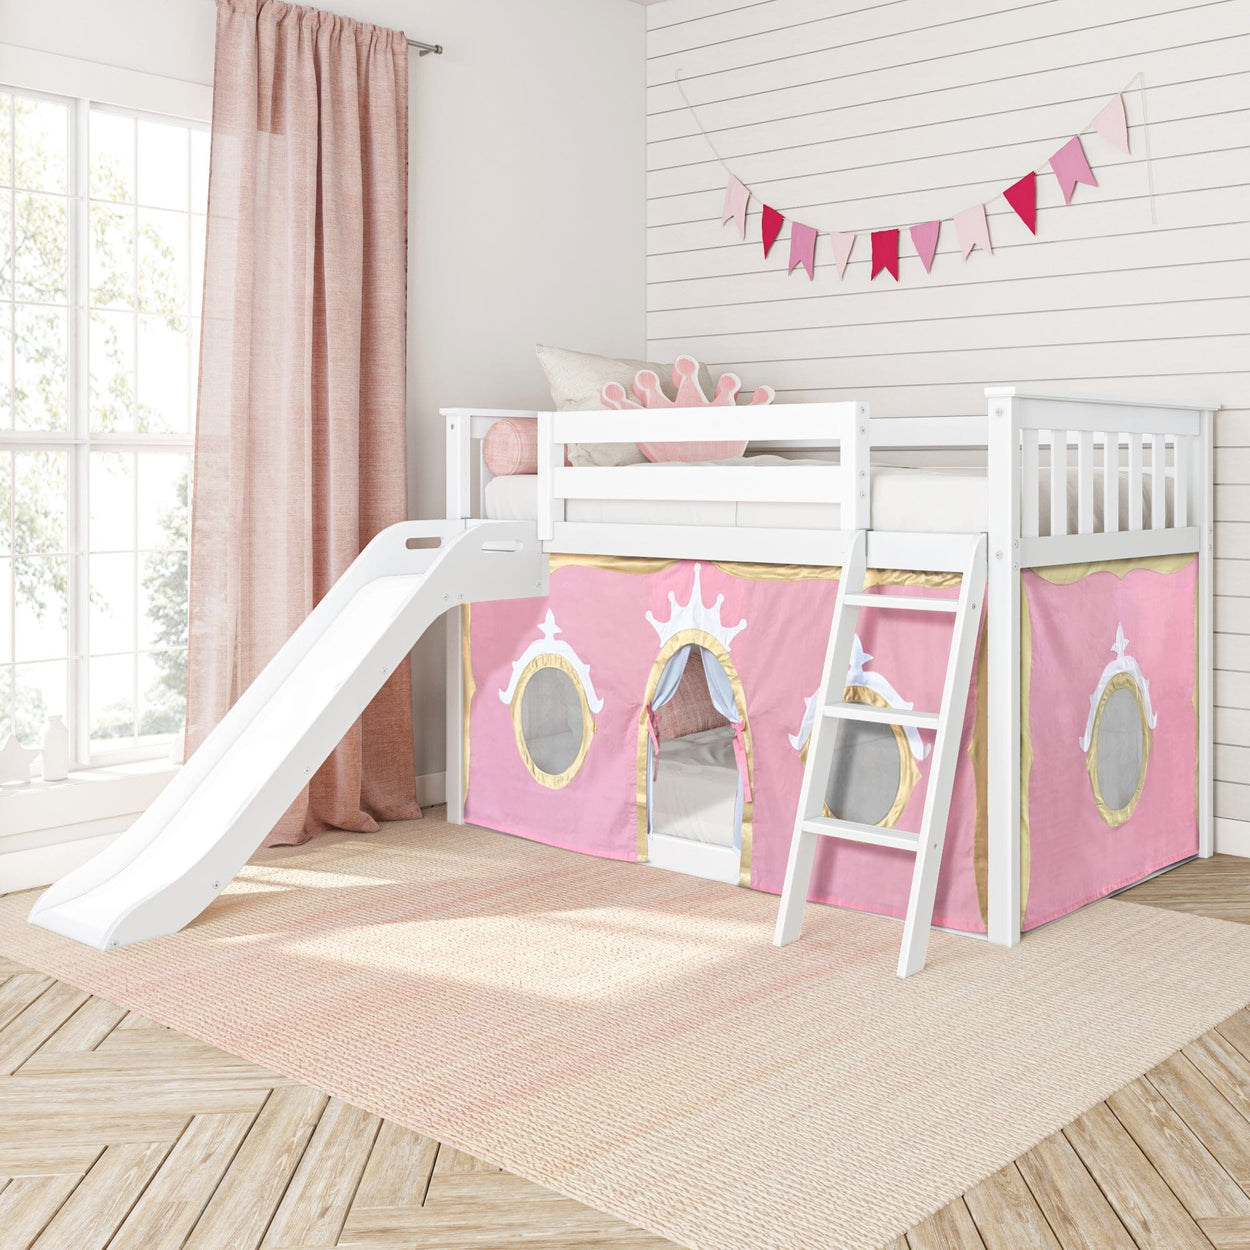 180417002083 : Bunk Beds Low Bunk with Easy Slide and Light Pink and Gold Princess Curtain, White